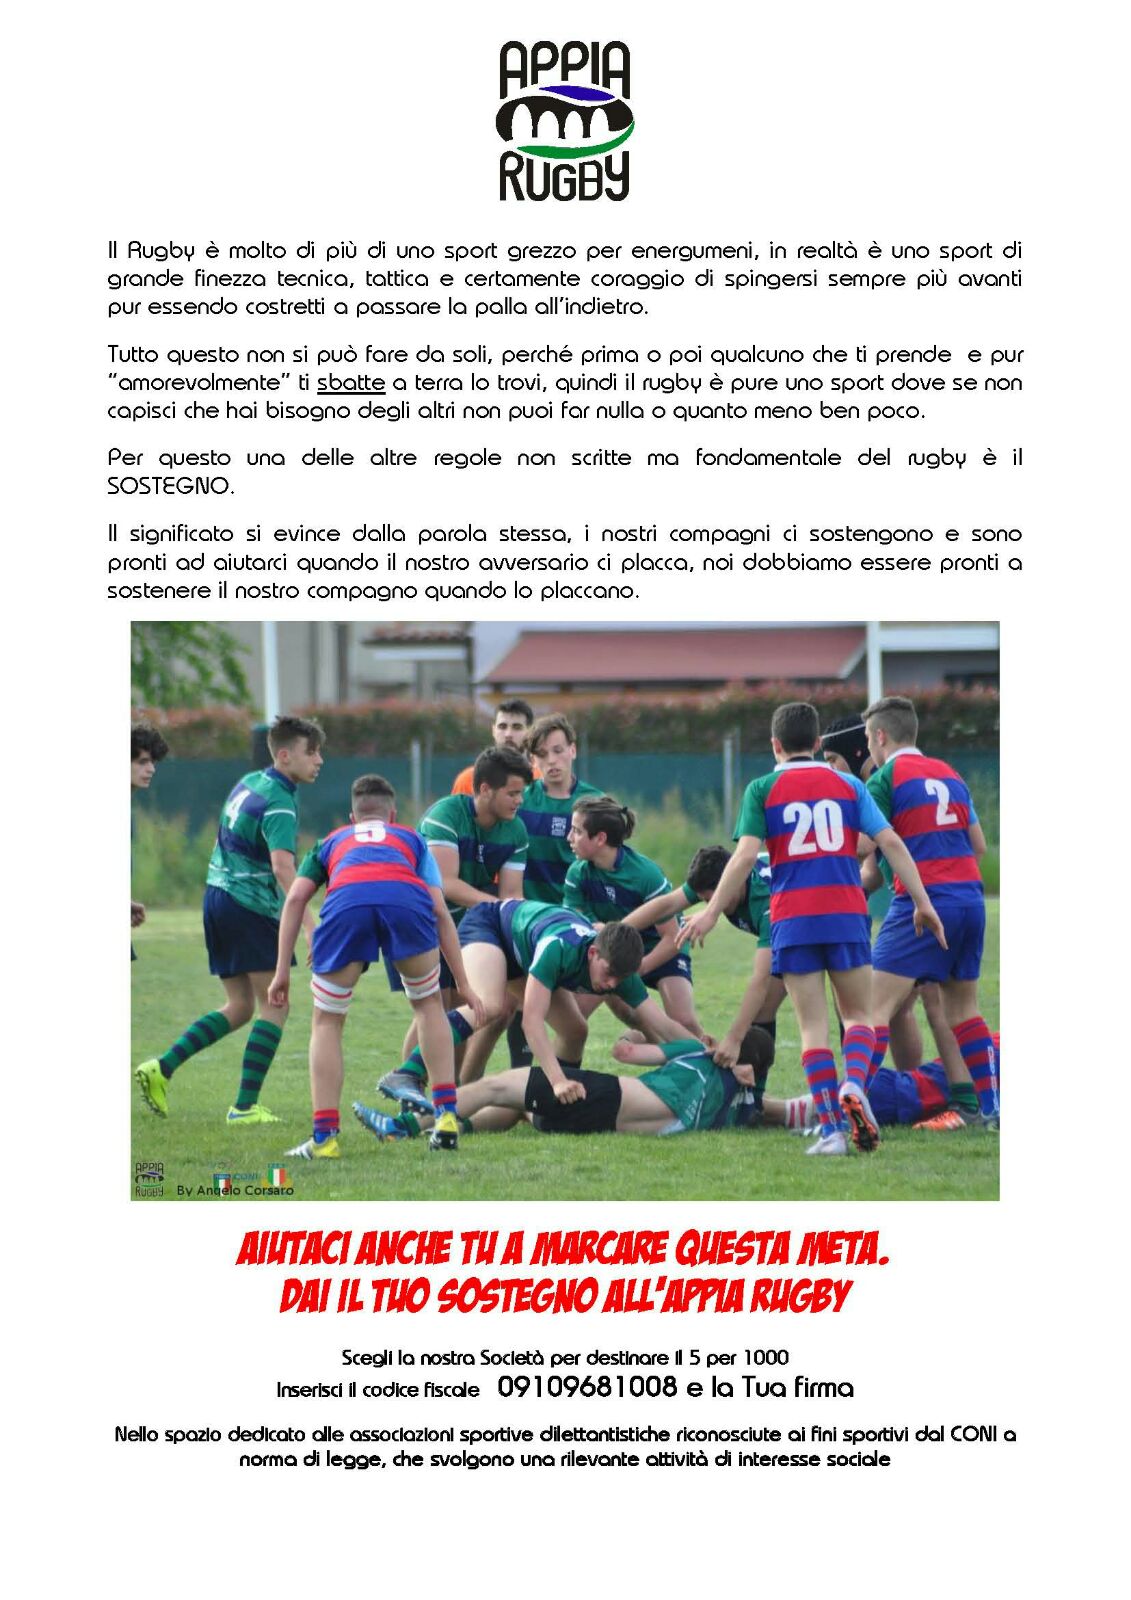 Dona il 5×1000 all’Appia Rugby